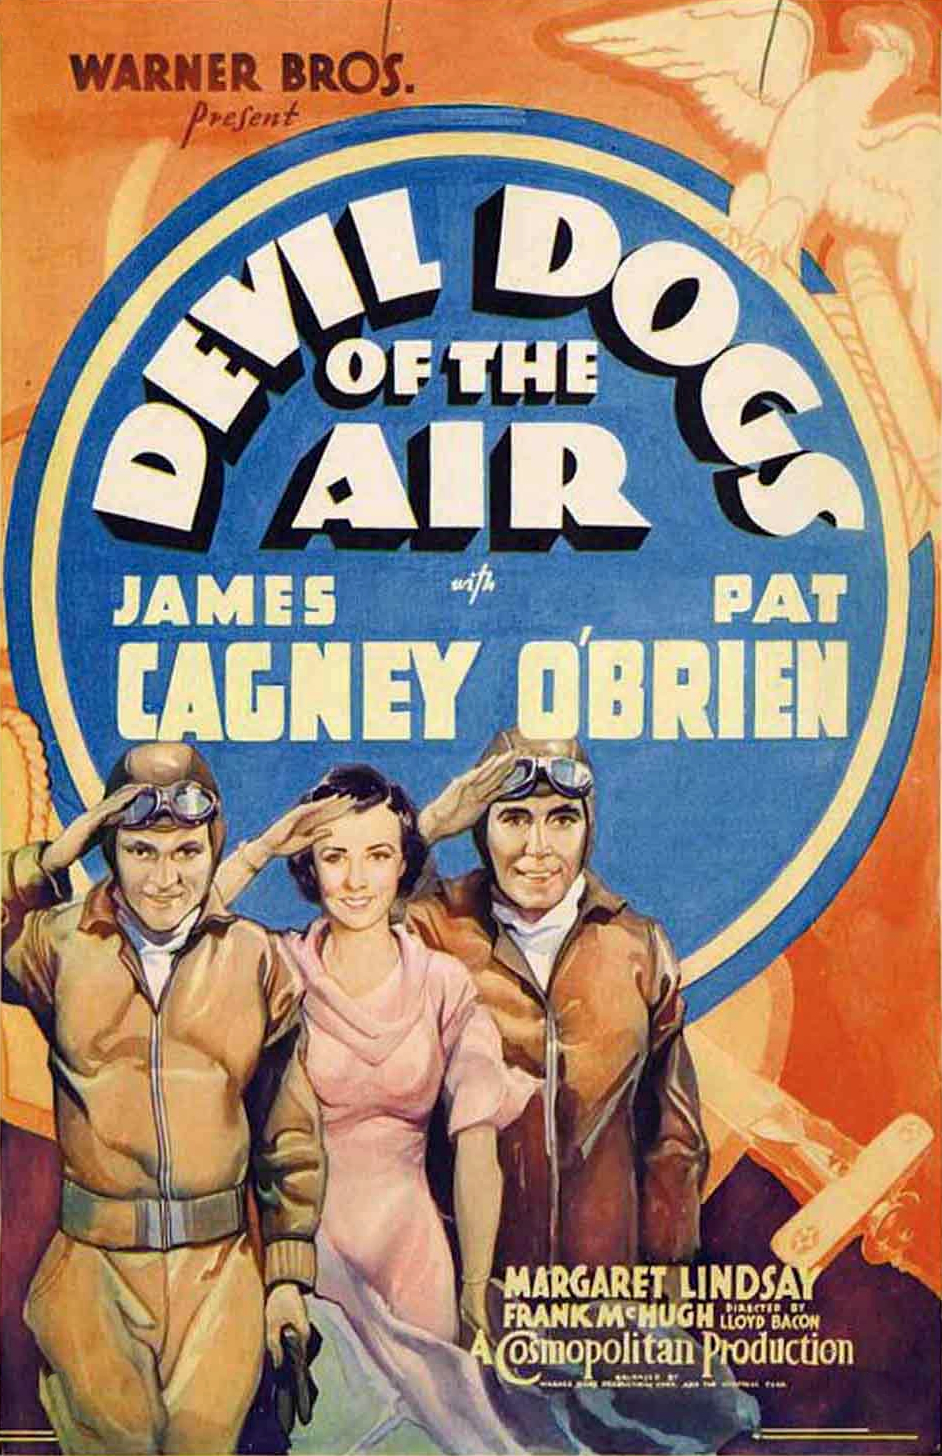 Devil Dogs of the Air (1935) Screenshot 3 